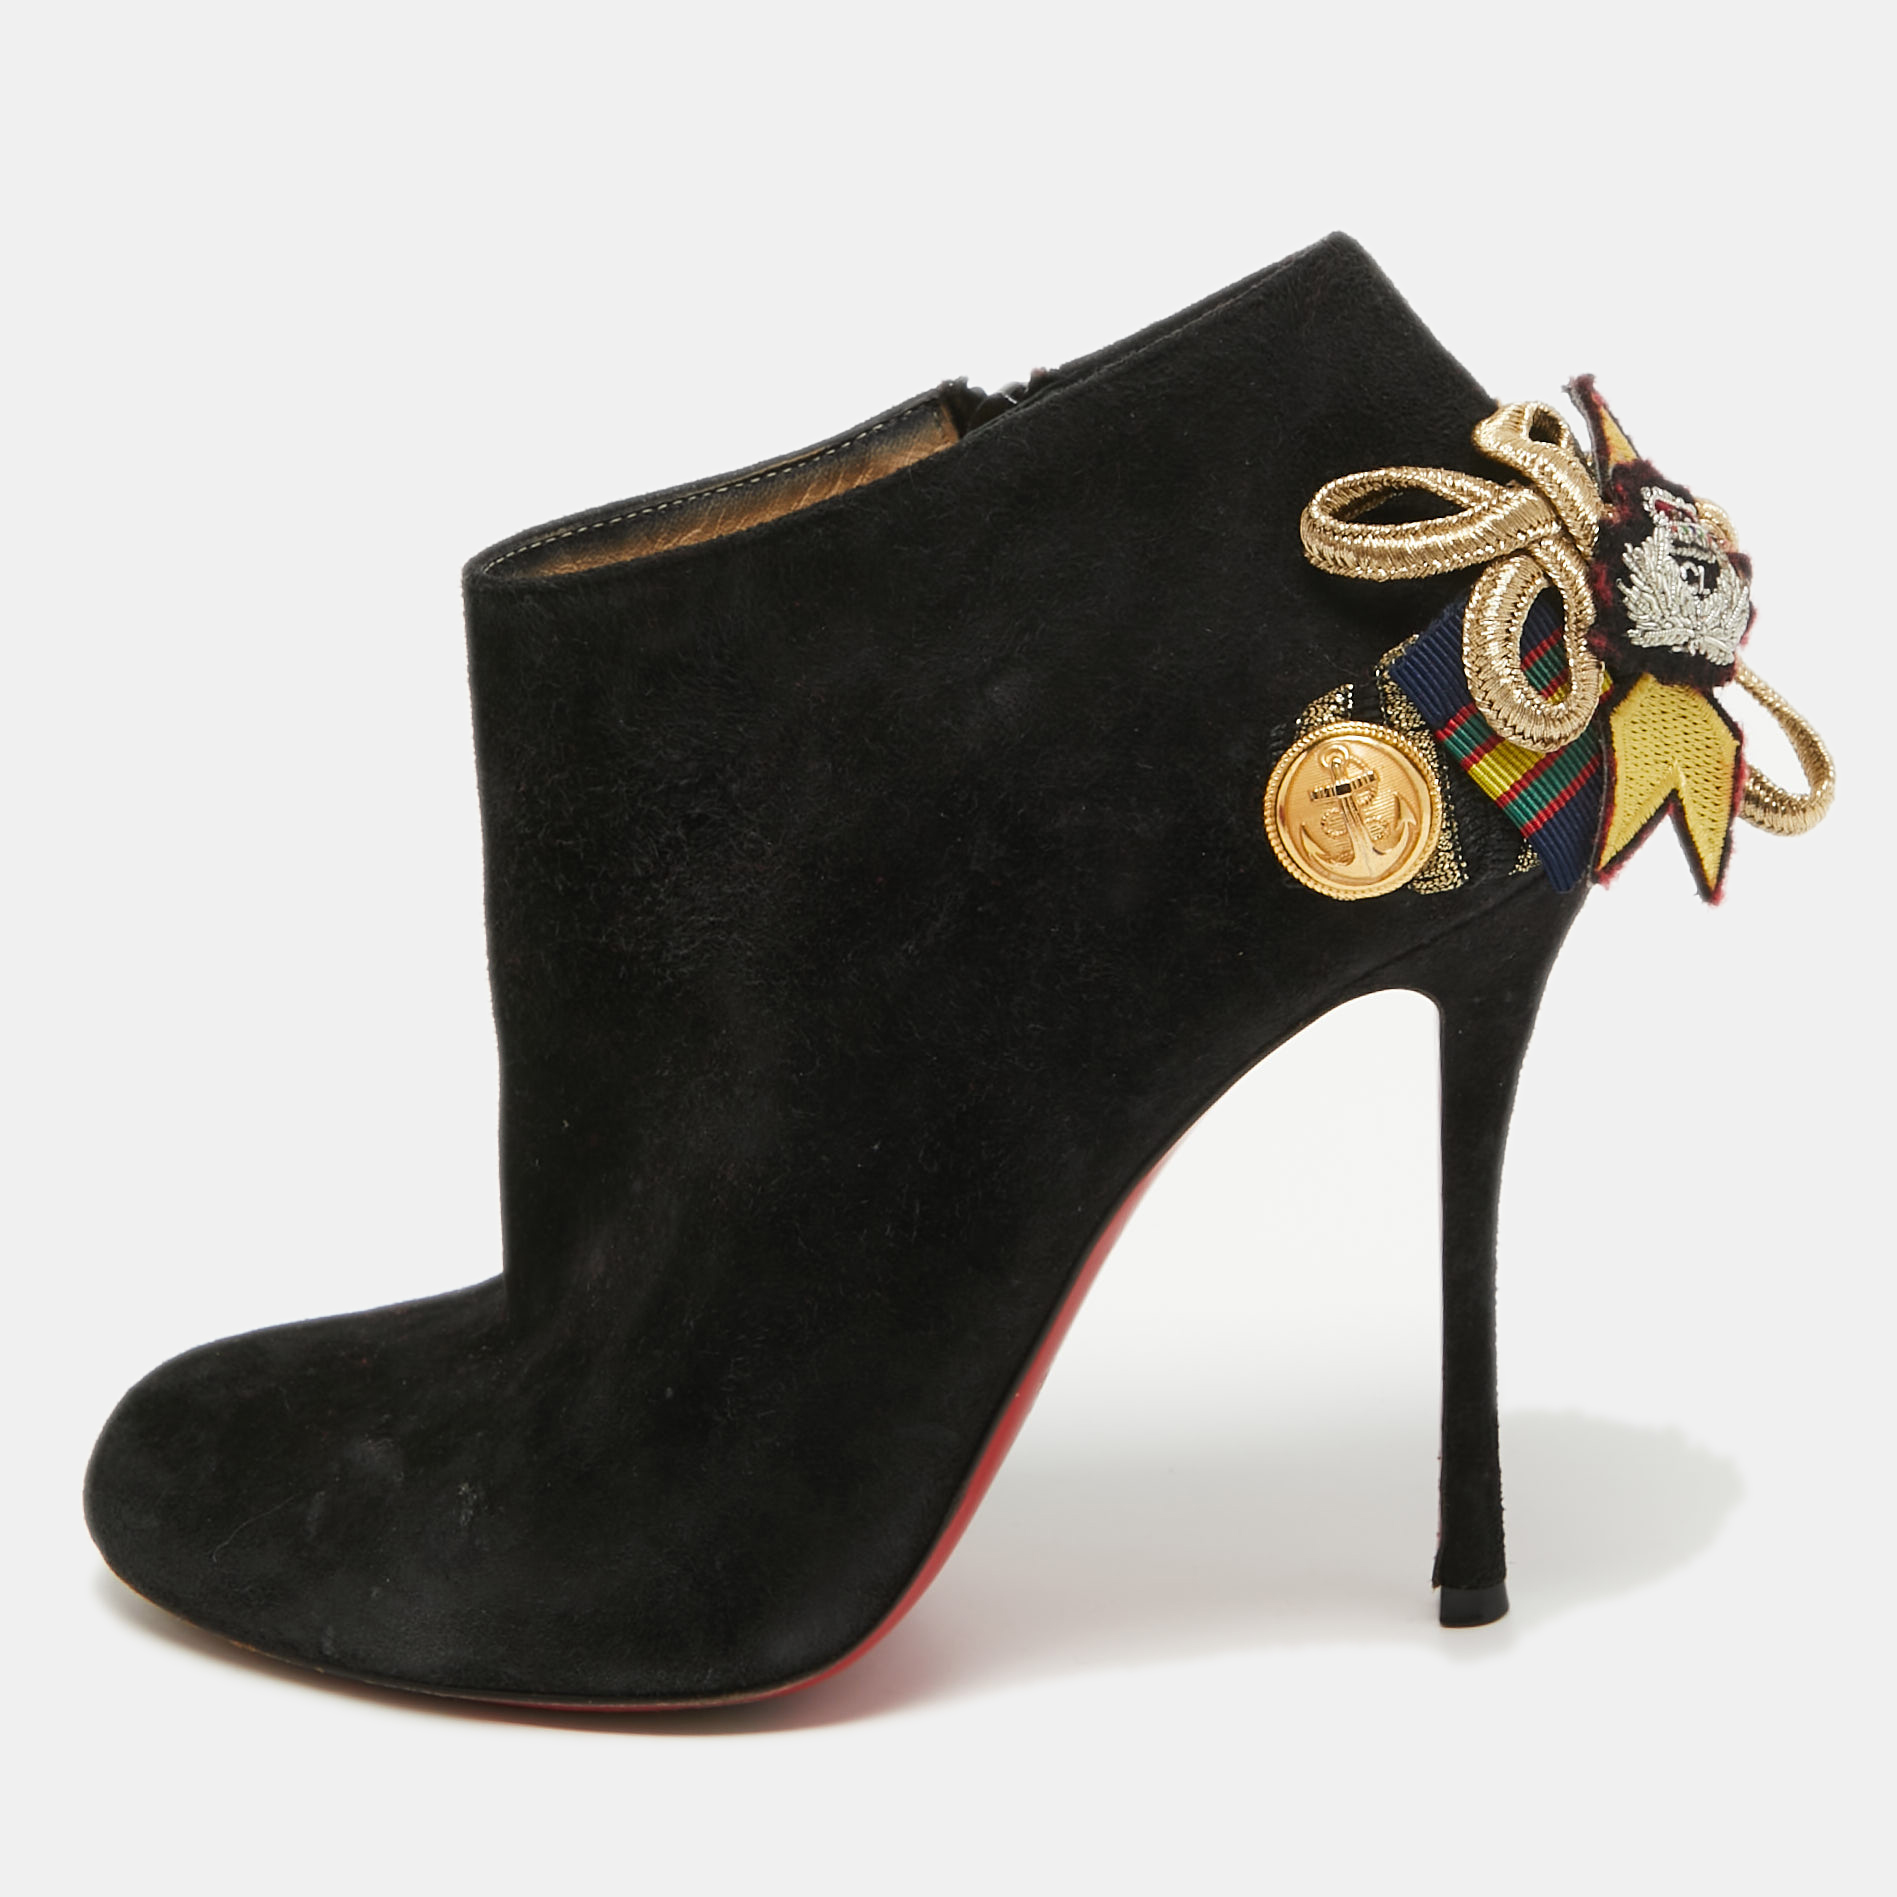 Christian Louboutin Black Suede Galobella Ankle Boots Size 38